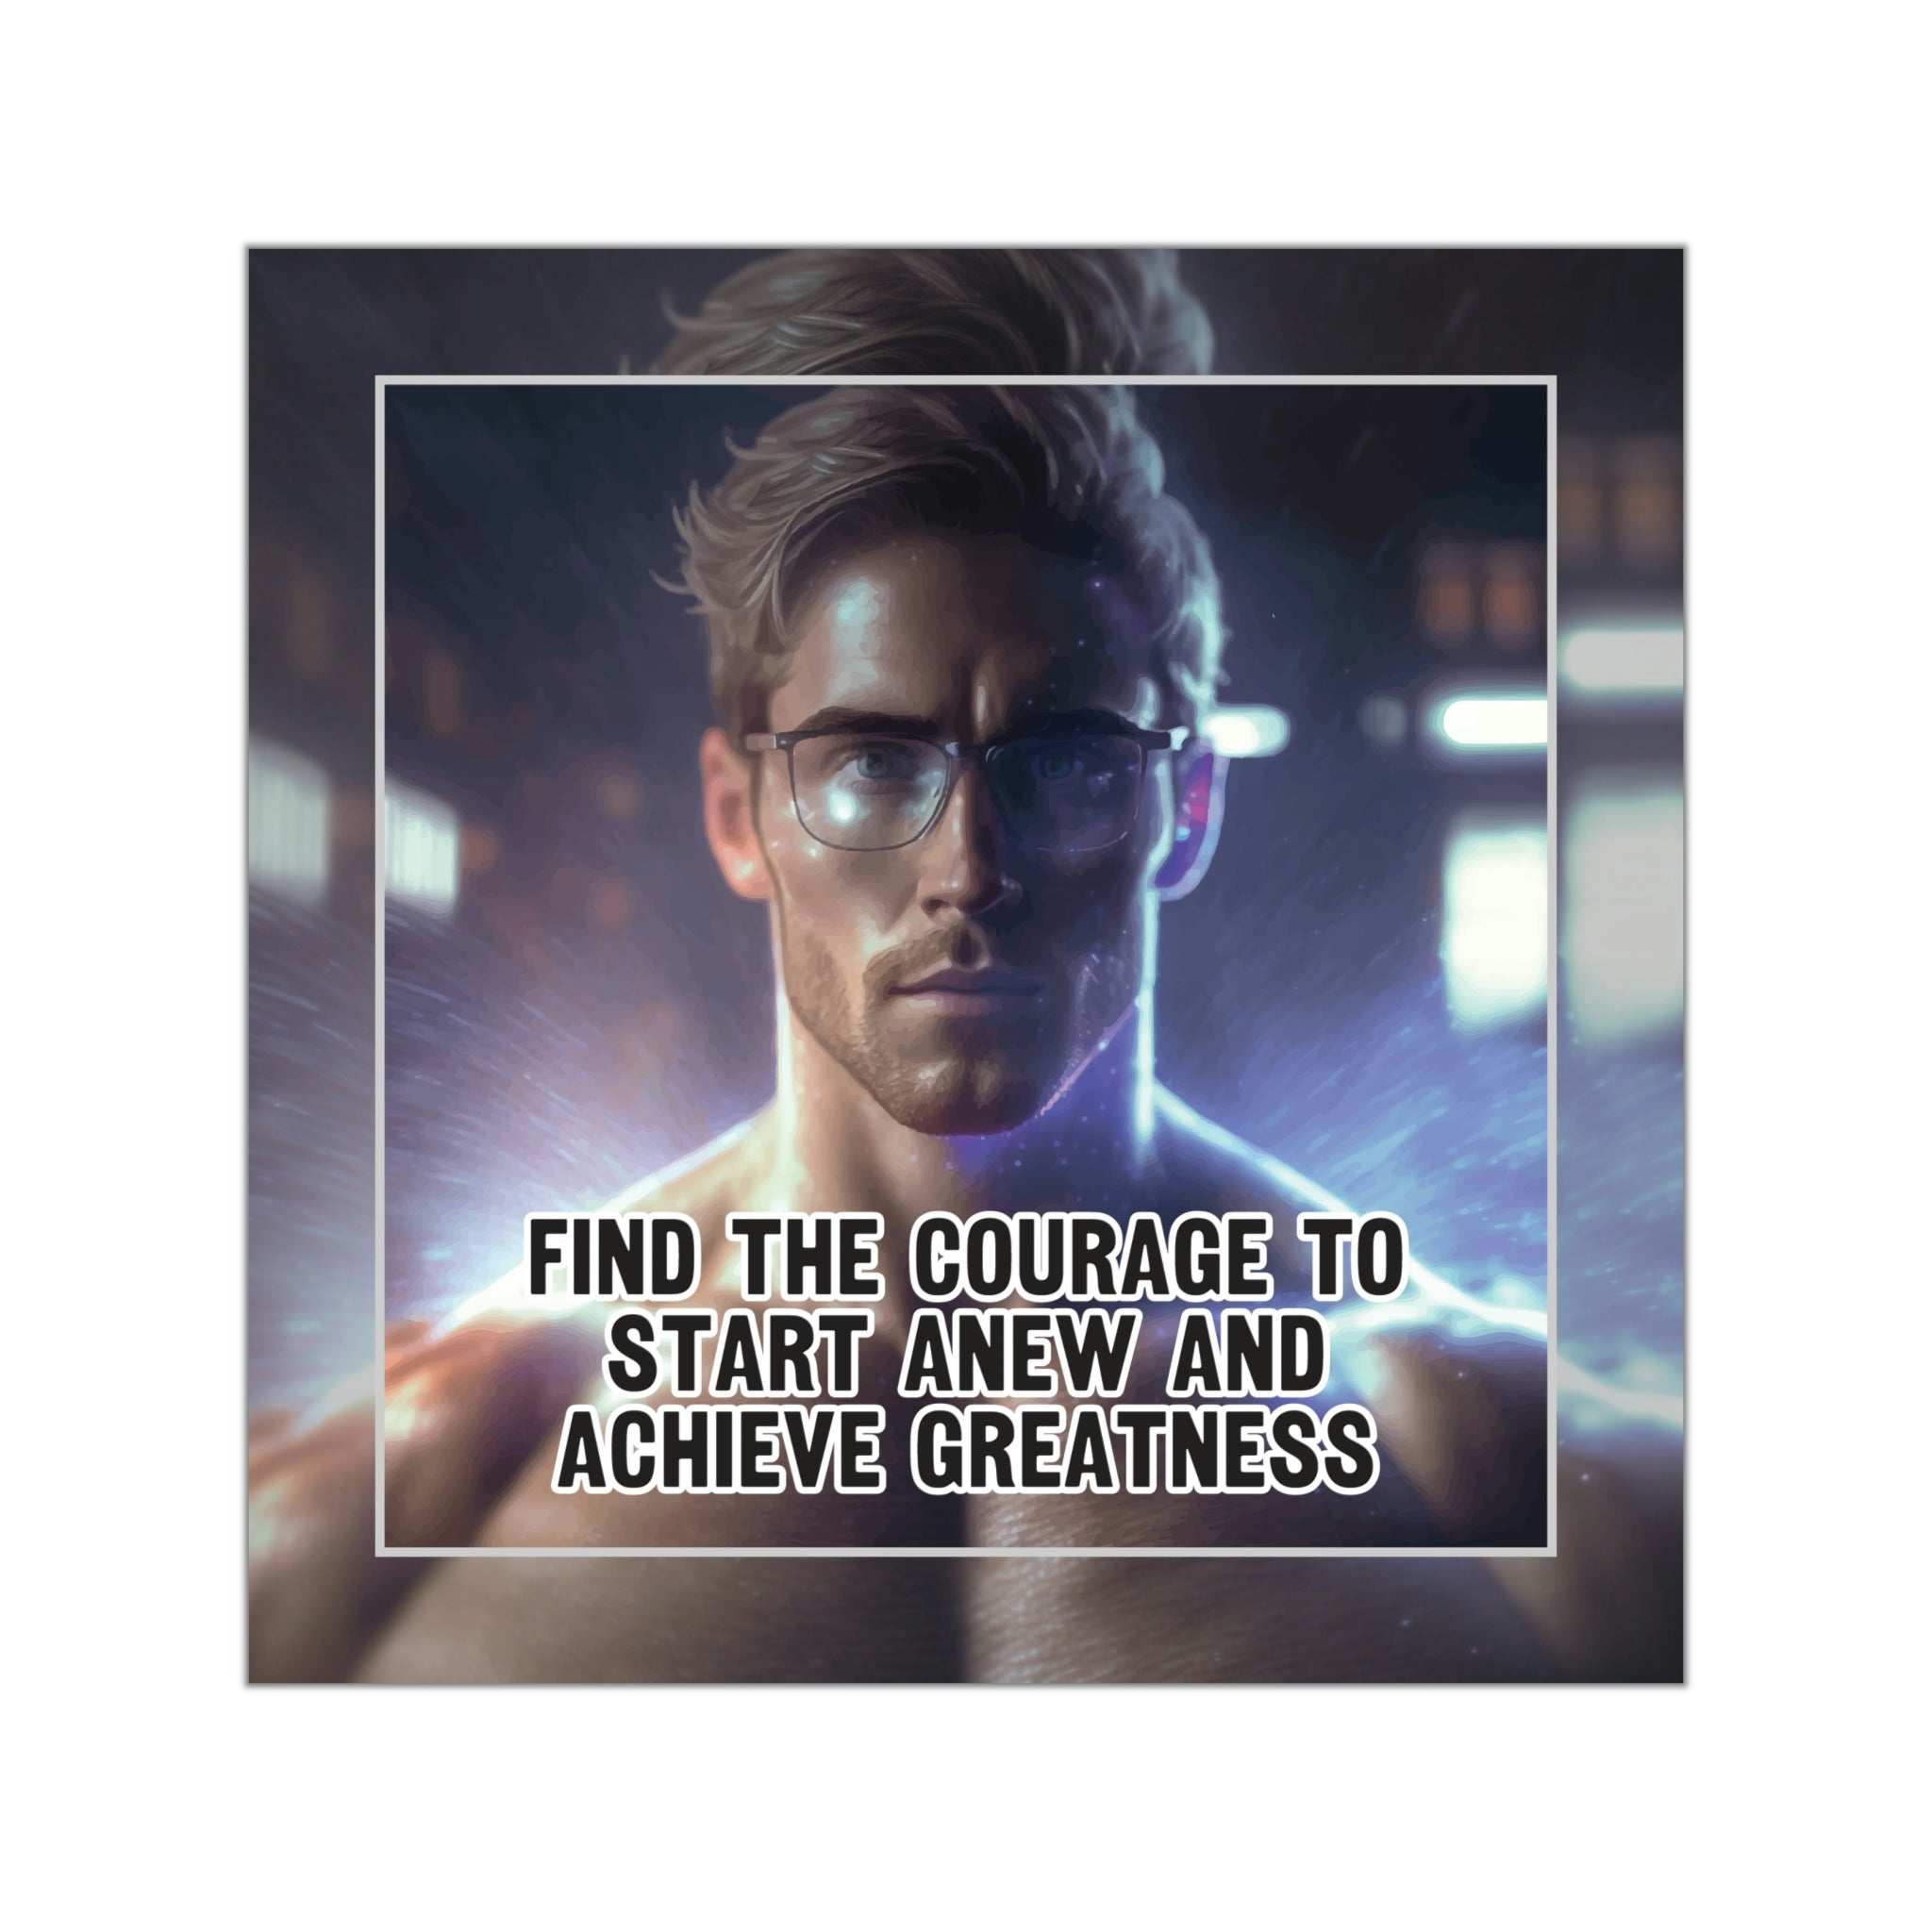 Achieving Greatness Starts with This Inspiring Square Sticker! #size_15x15-inches